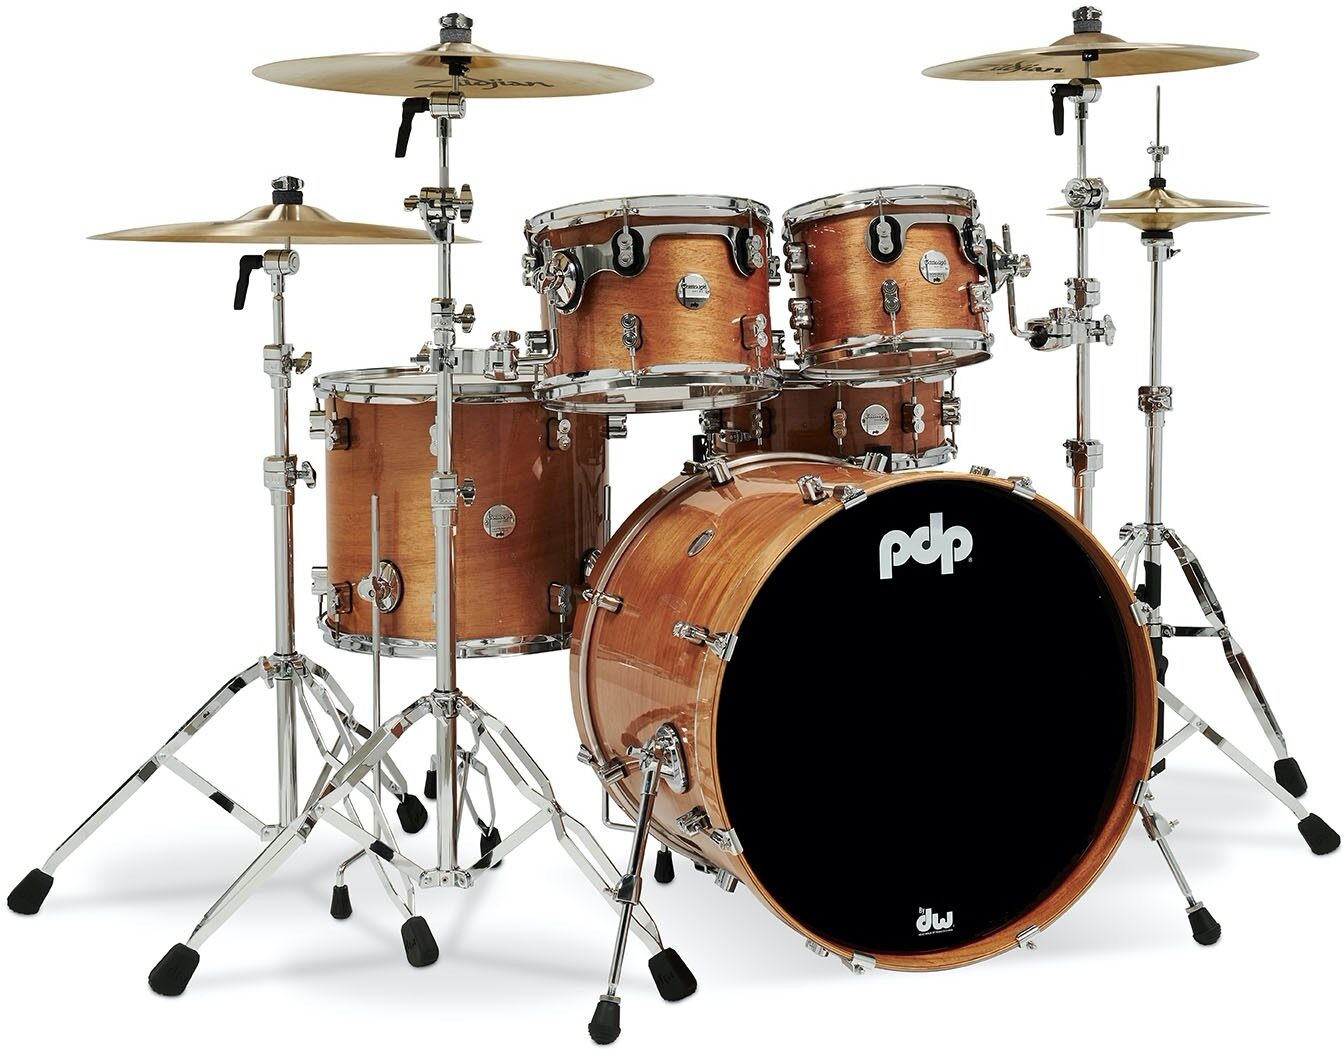 Pacific Drums PDCMX2215 Concept Maple Exotic Drum Shell Kit